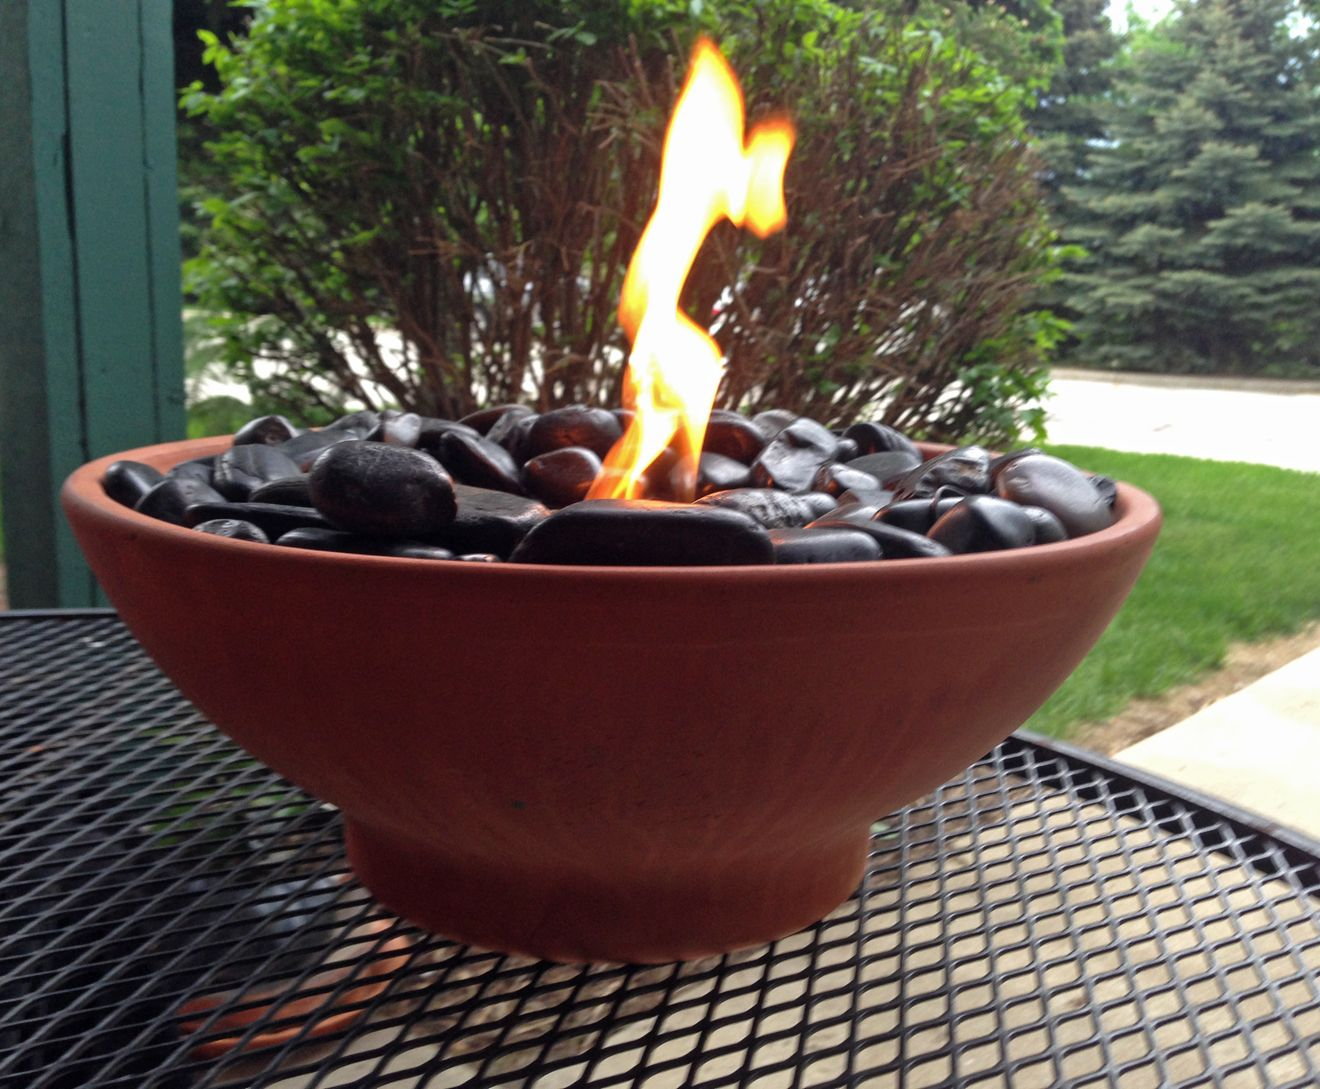 Diy Table Top Fire Pit Made With Black River Rocks And Real Flame intended for dimensions 1320 X 1089